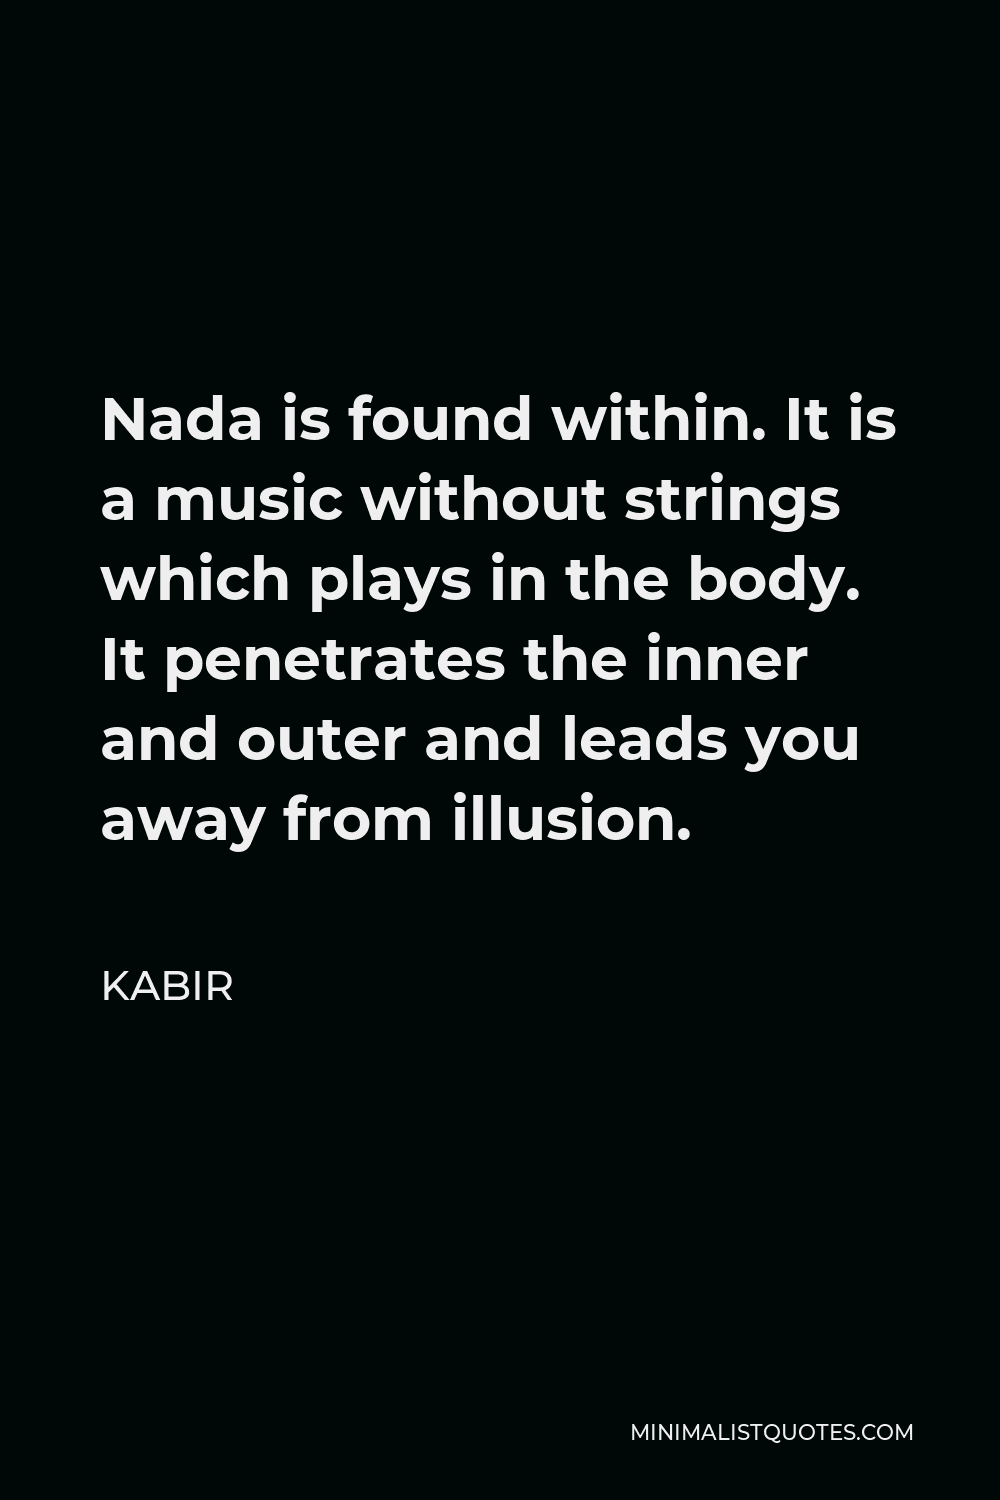 Kabir Quote - Nada is found within. It is a music without strings which plays in the body. It penetrates the inner and outer and leads you away from illusion.